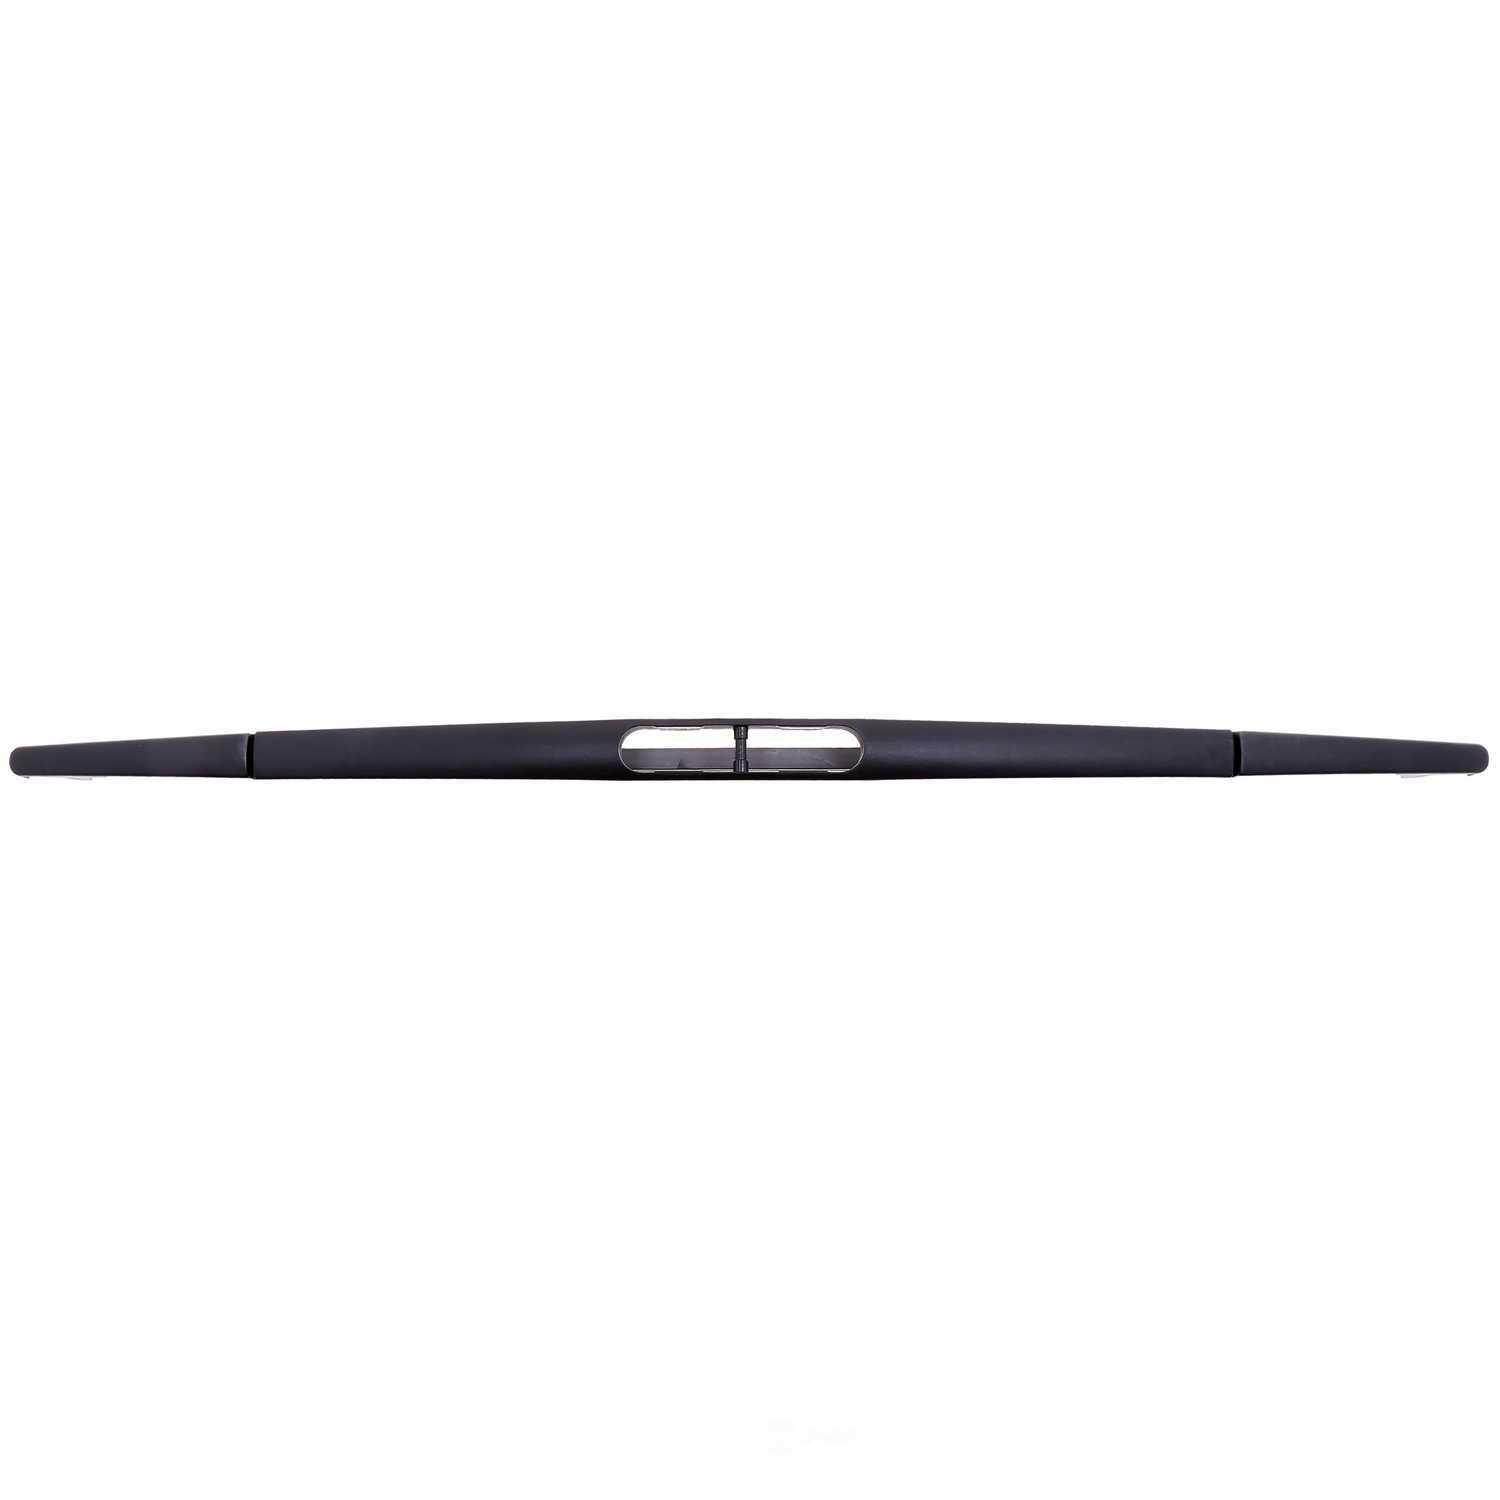 ACDELCO GOLD/PROFESSIONAL - Performance Windshield Wiper Blade (Rear) - DCC 8-216E